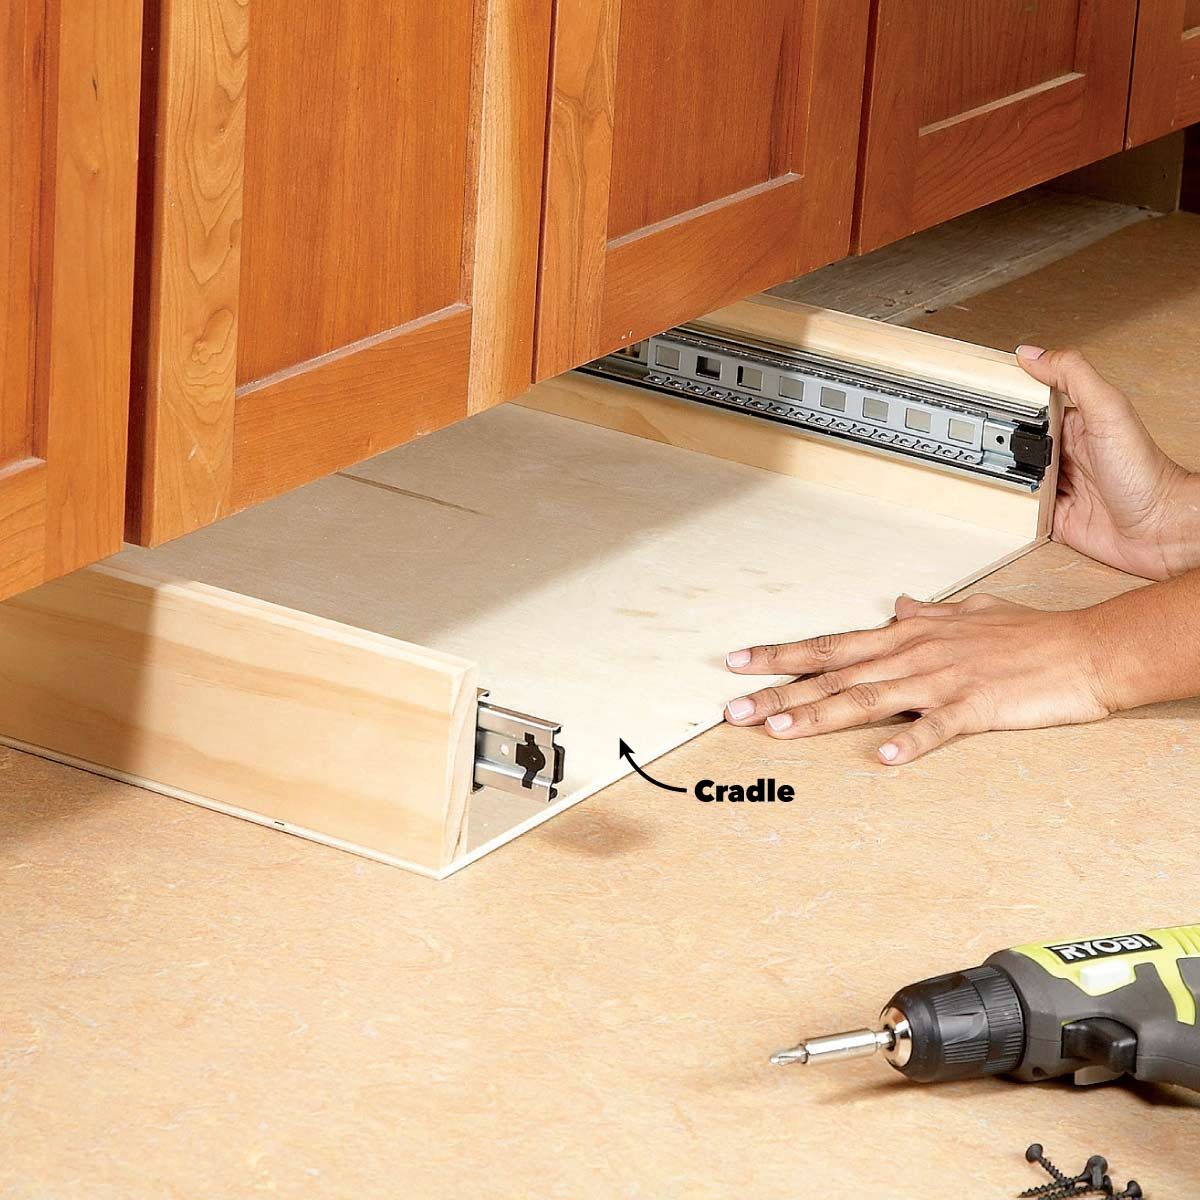 How To Build Under Cabinet Drawers Increase Kitchen Storage